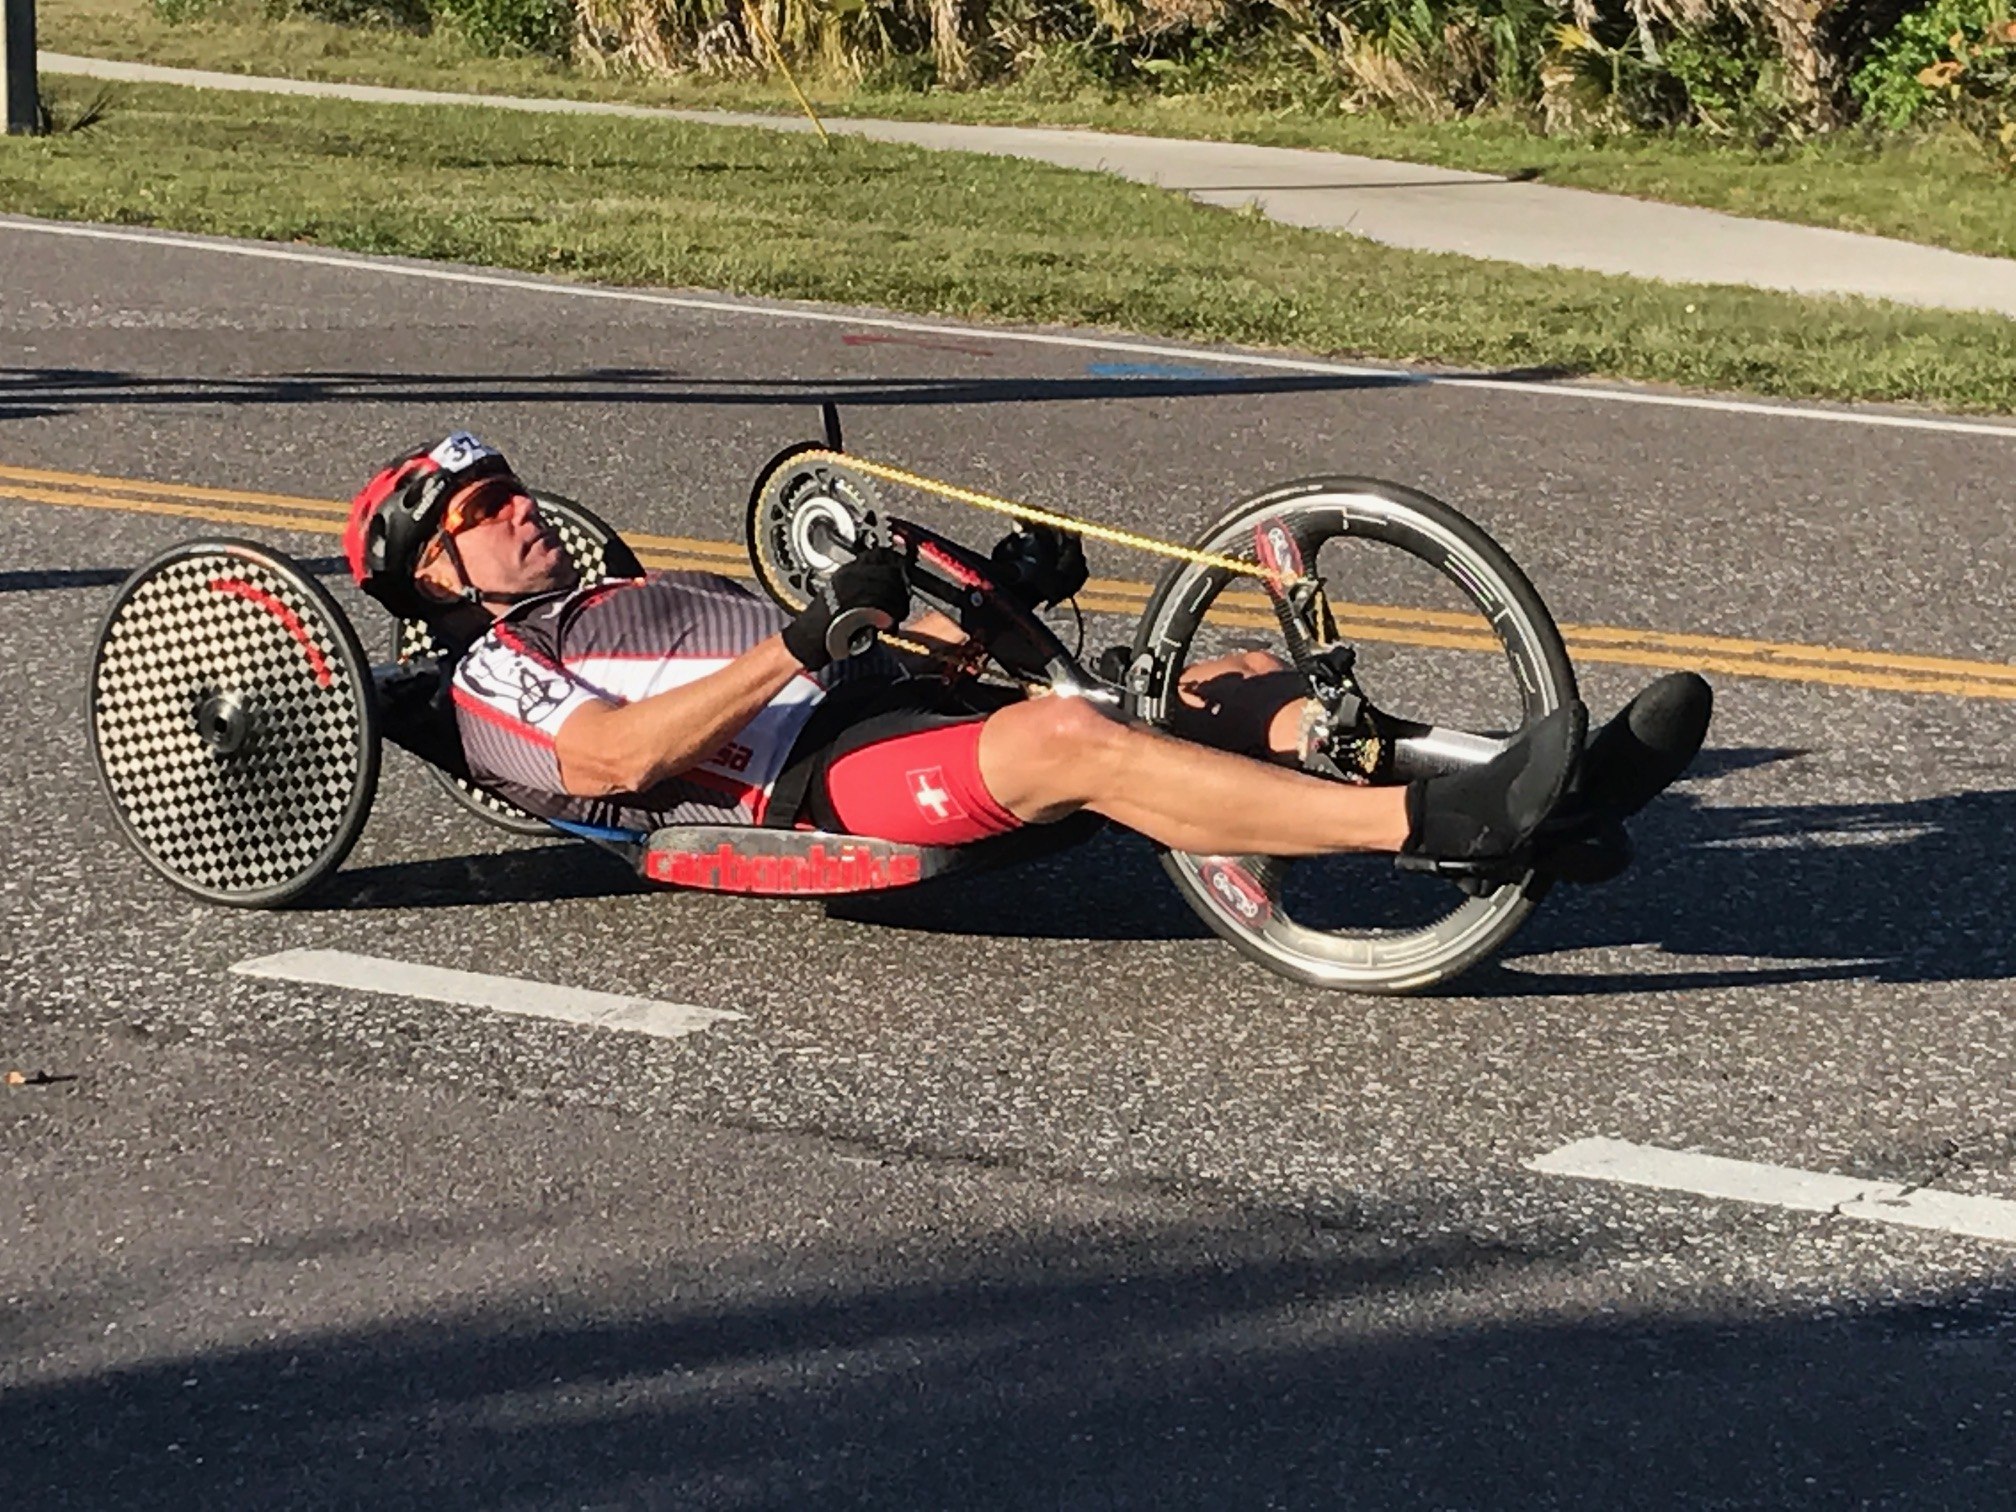 Chris continues his passion for wheelchair racing, and is always improving the products and even using them himself.